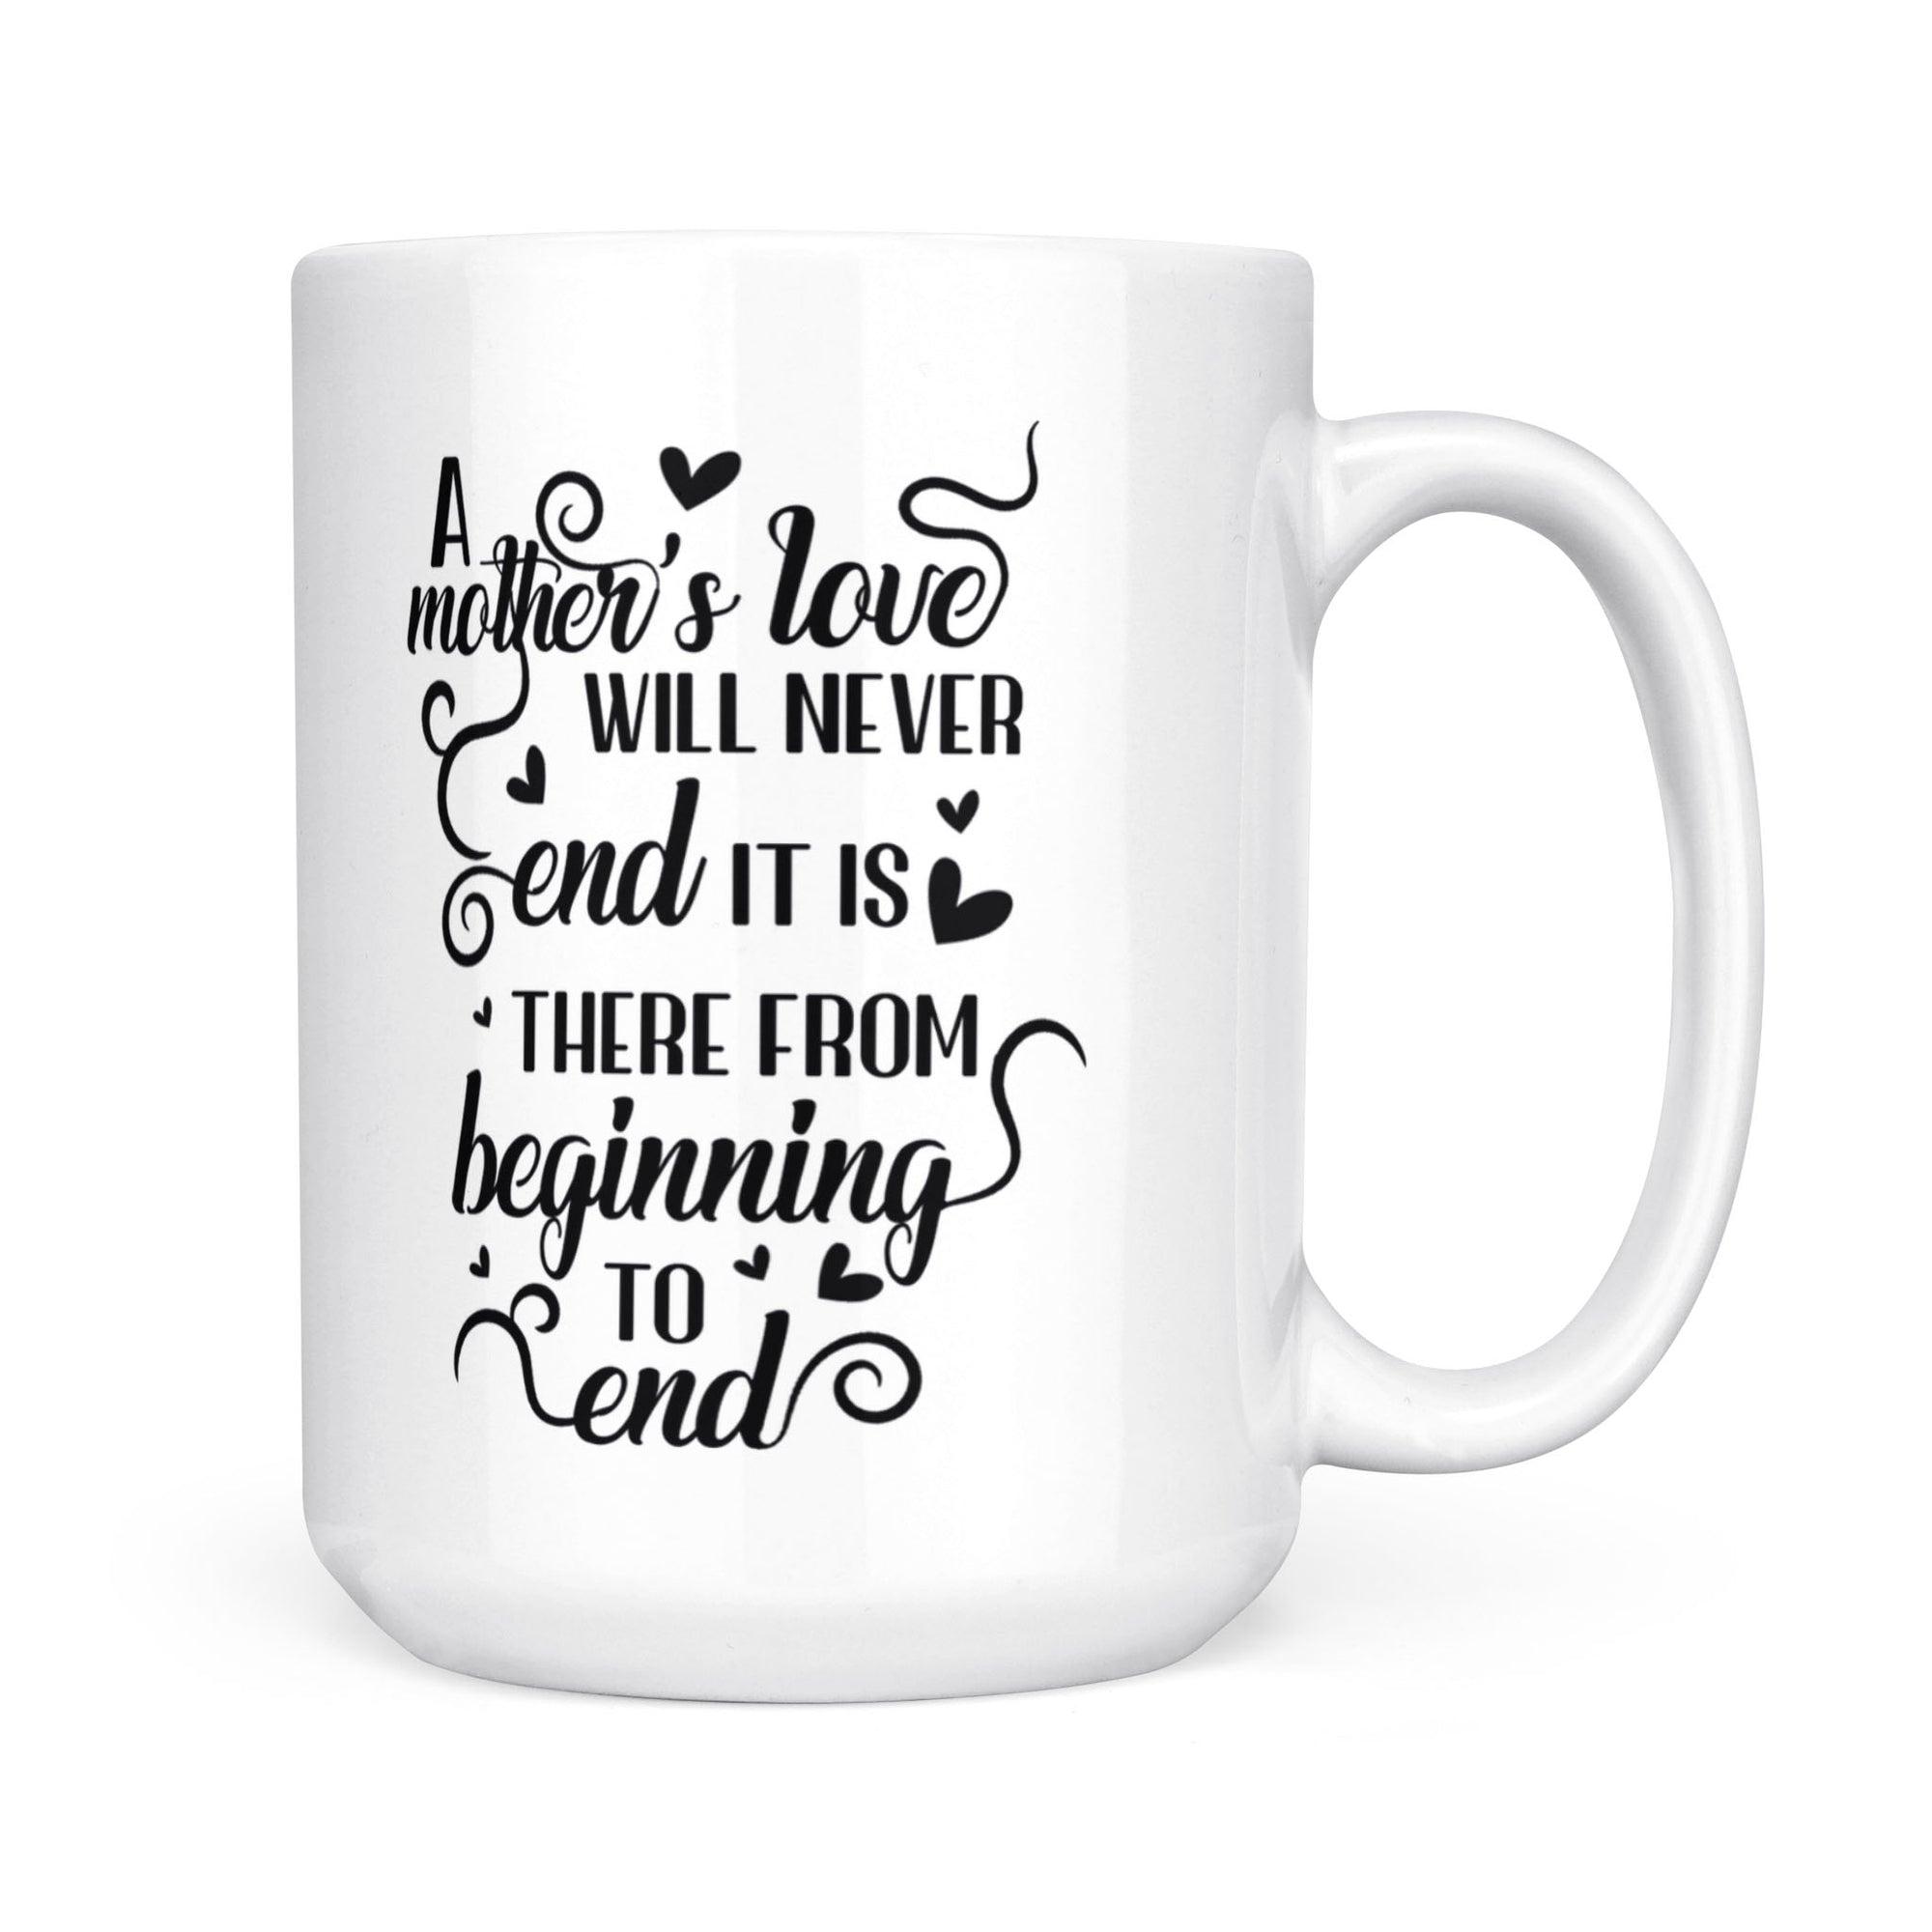 A Mother's Love Will Never End - White Mug MG17